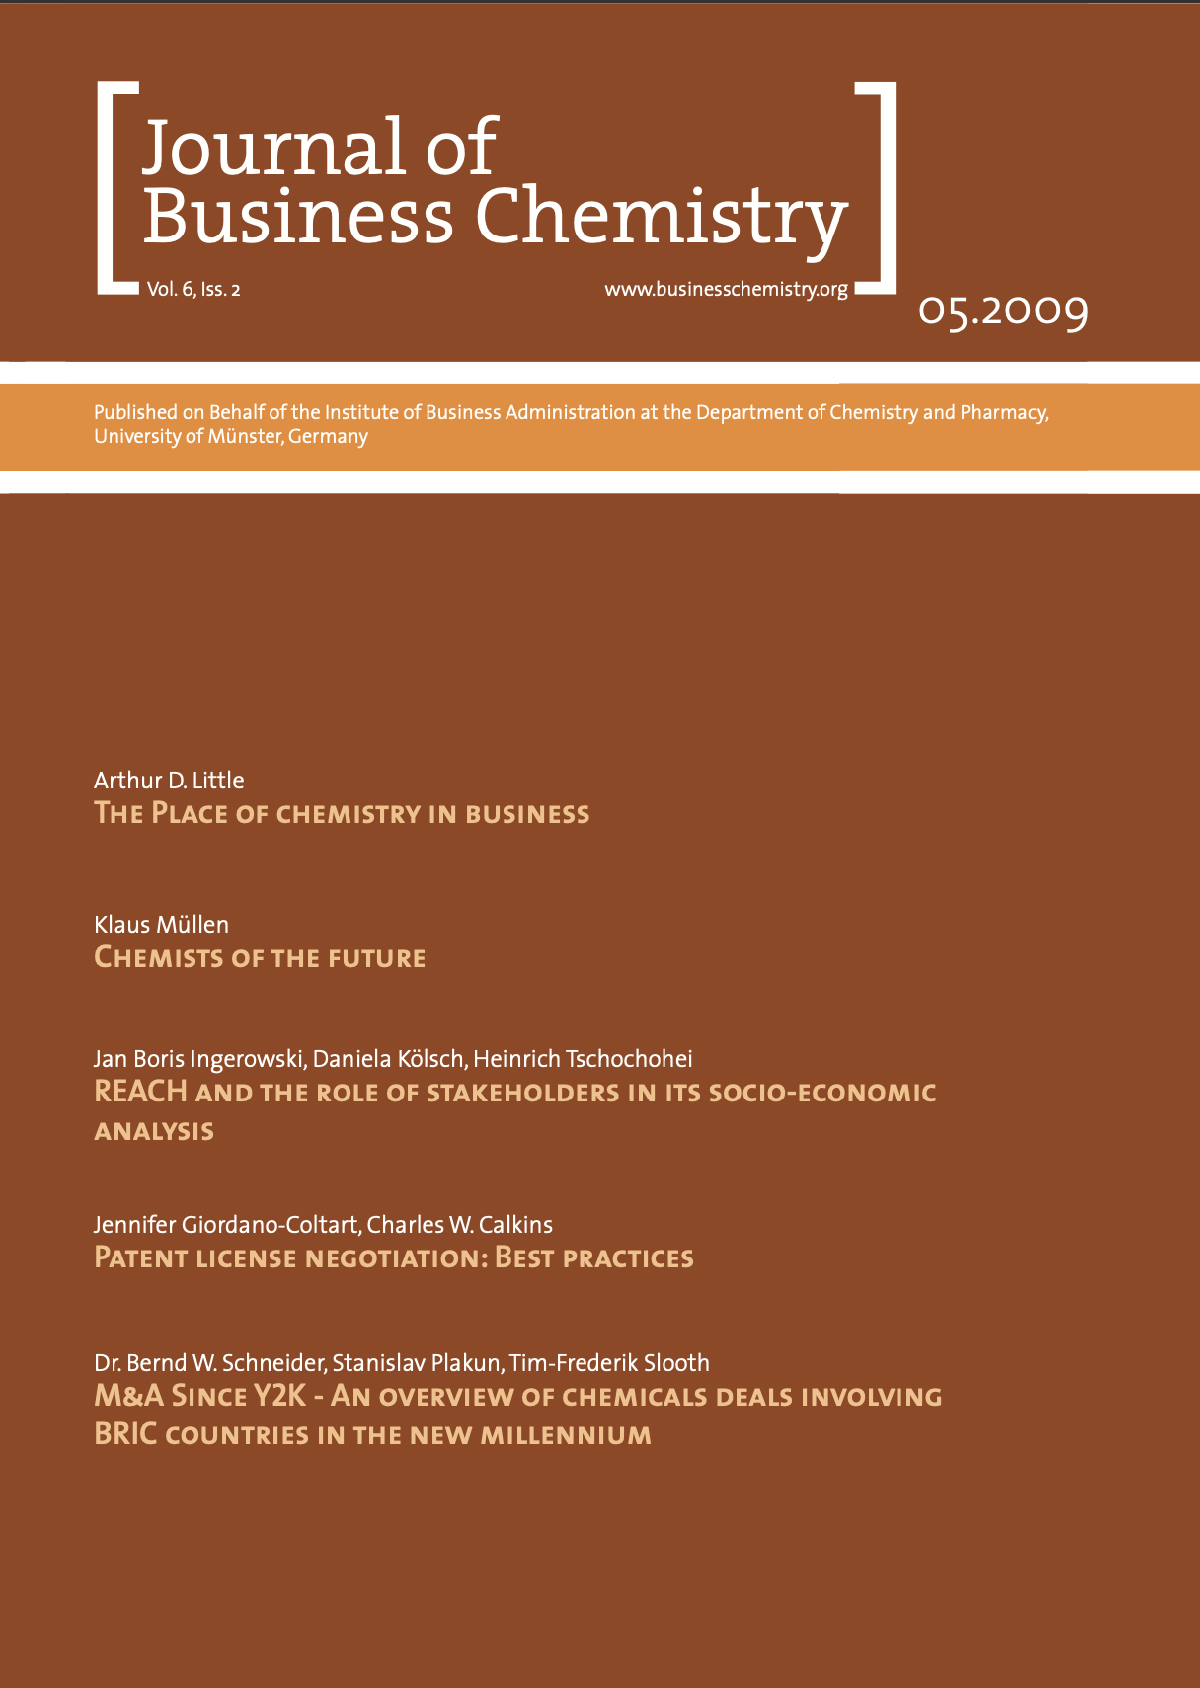 Journal of Business Chemistry May 2009